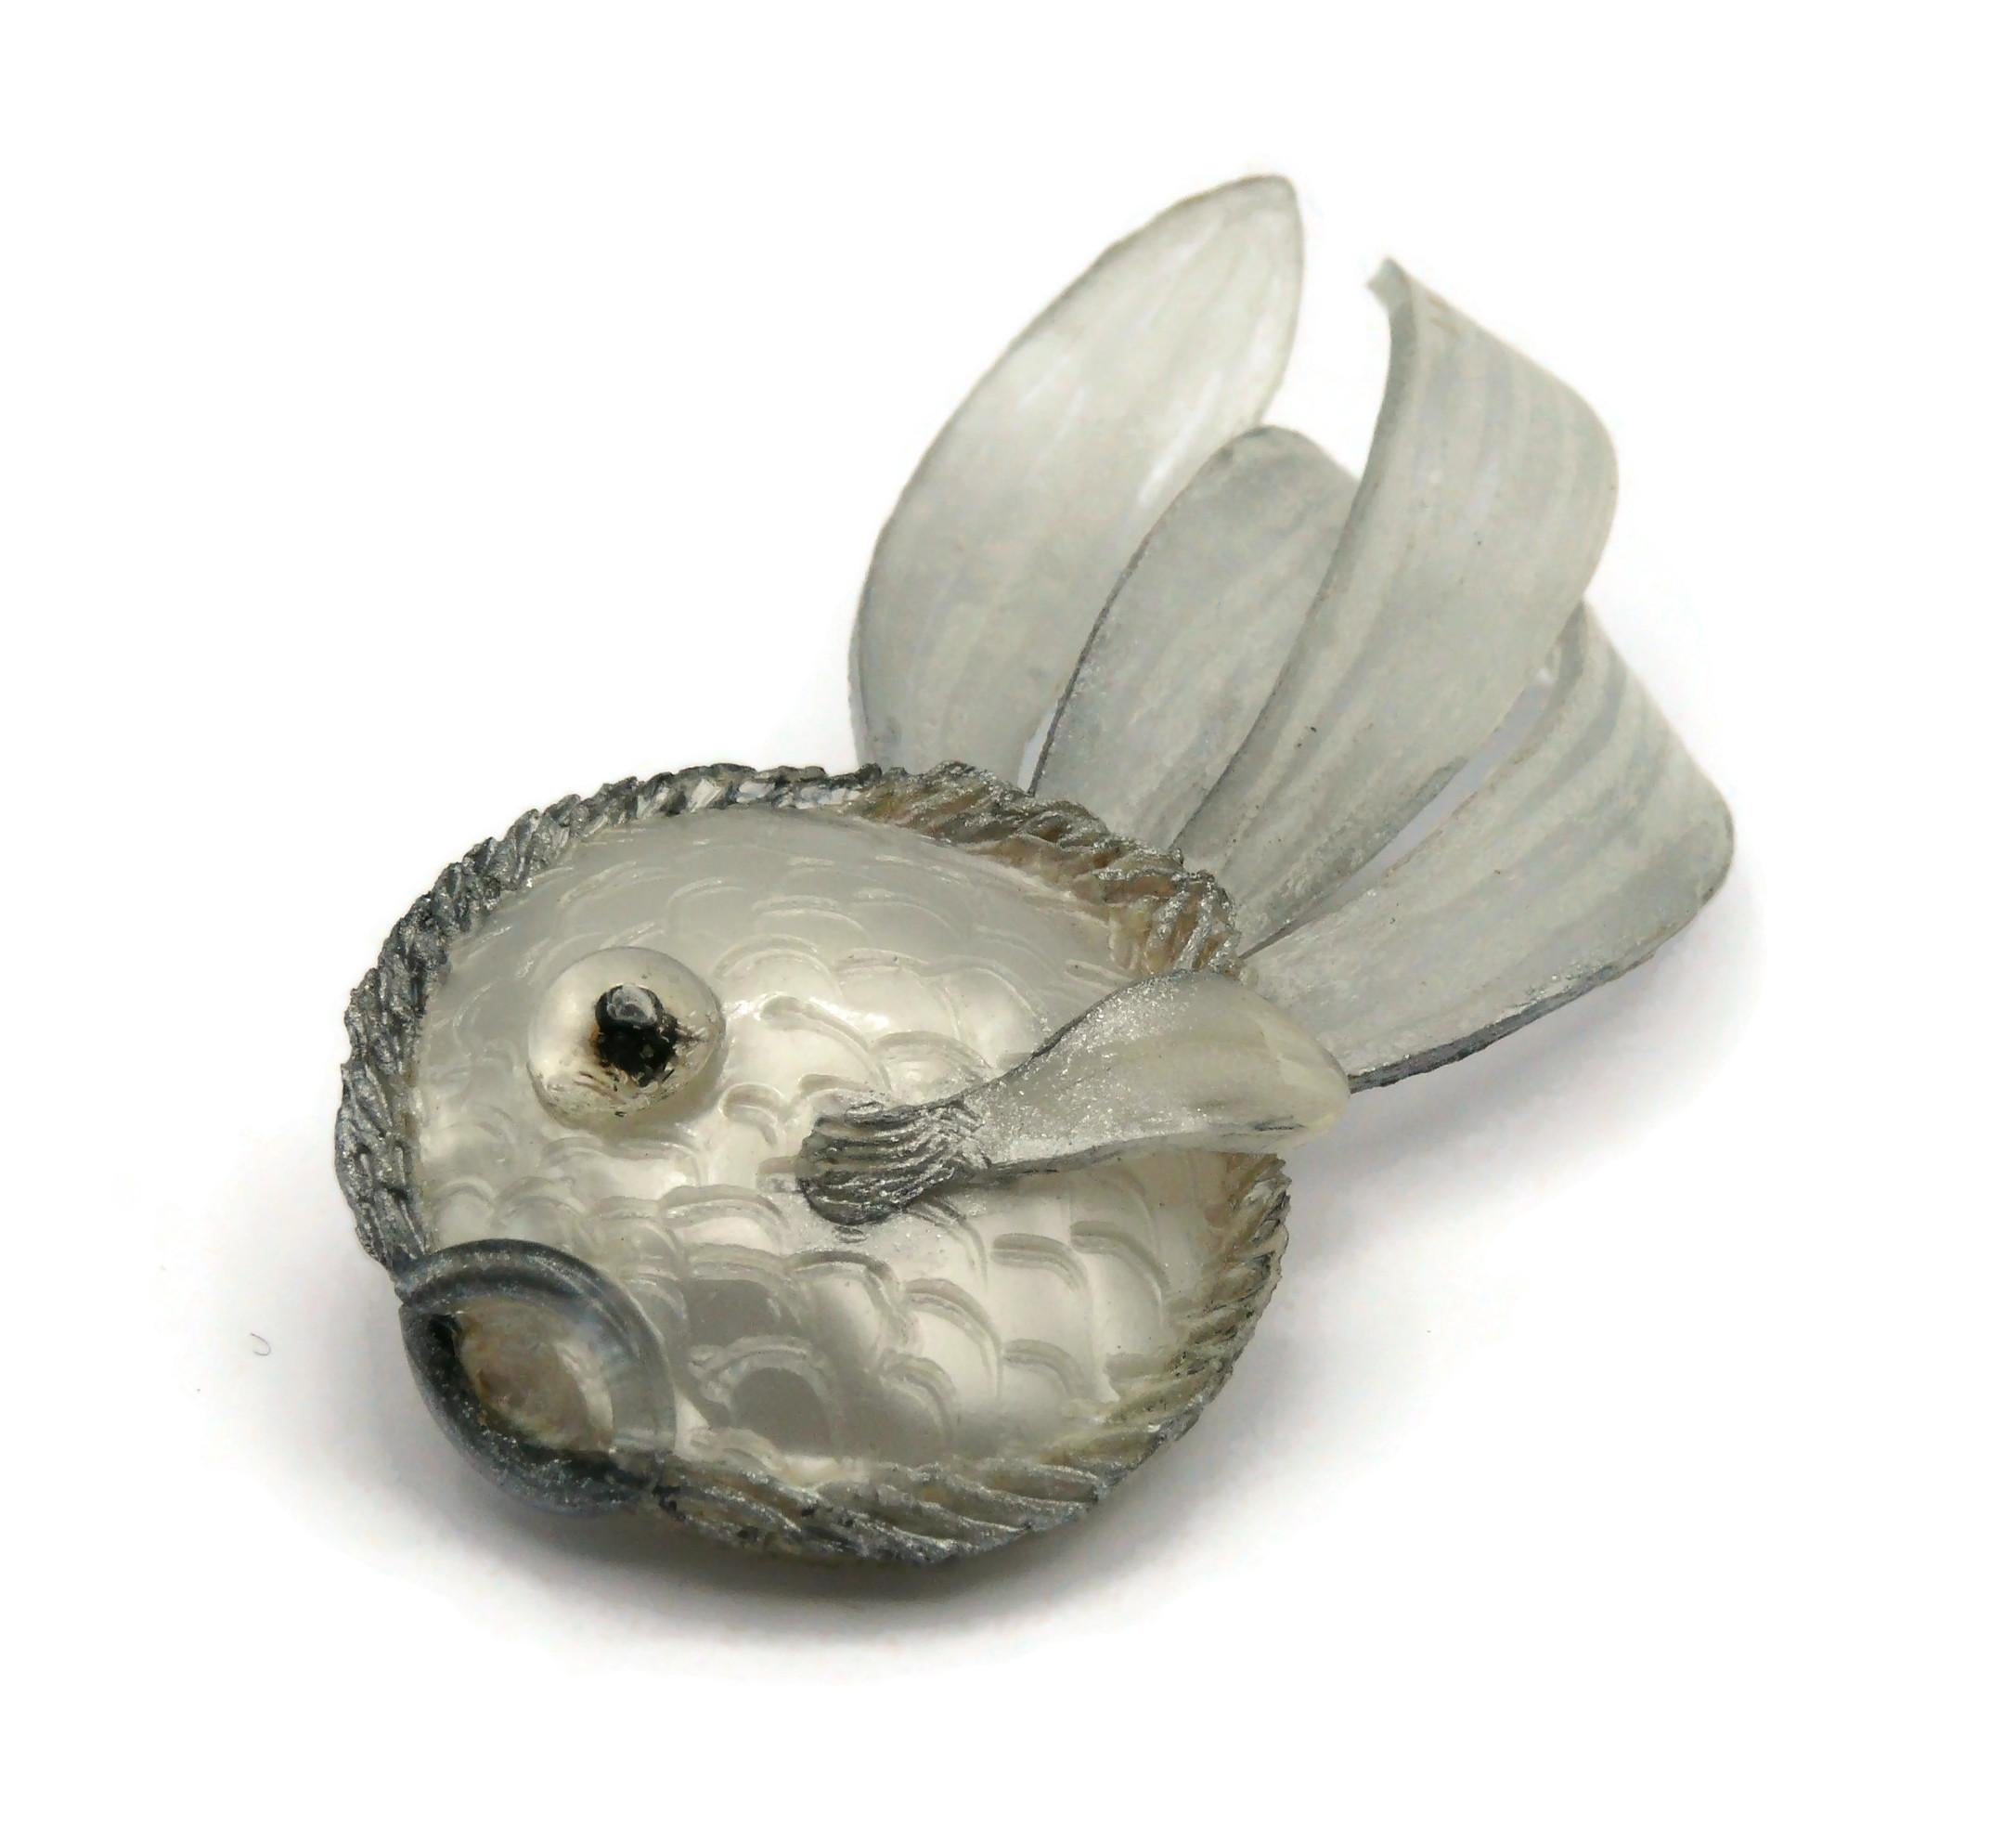 MONIQUE VEDIE (attributed to) Vintage Talosel Resin Fish Lapel Pin Brooch For Sale 4